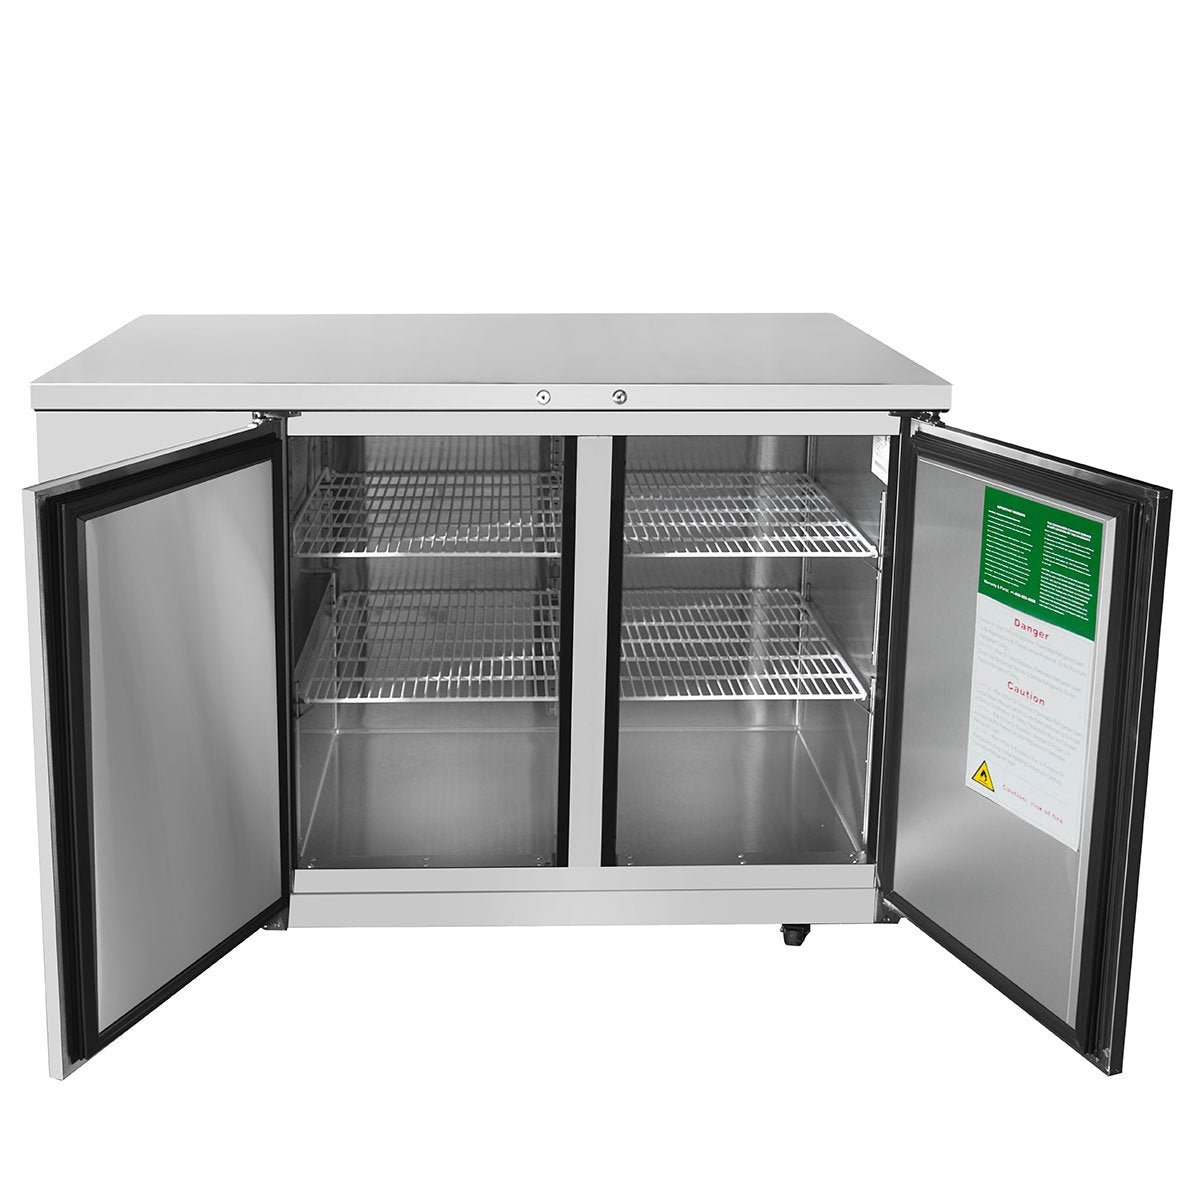 Atosa MBB48GR 48" Back Bar Cooler - Stainless Steel